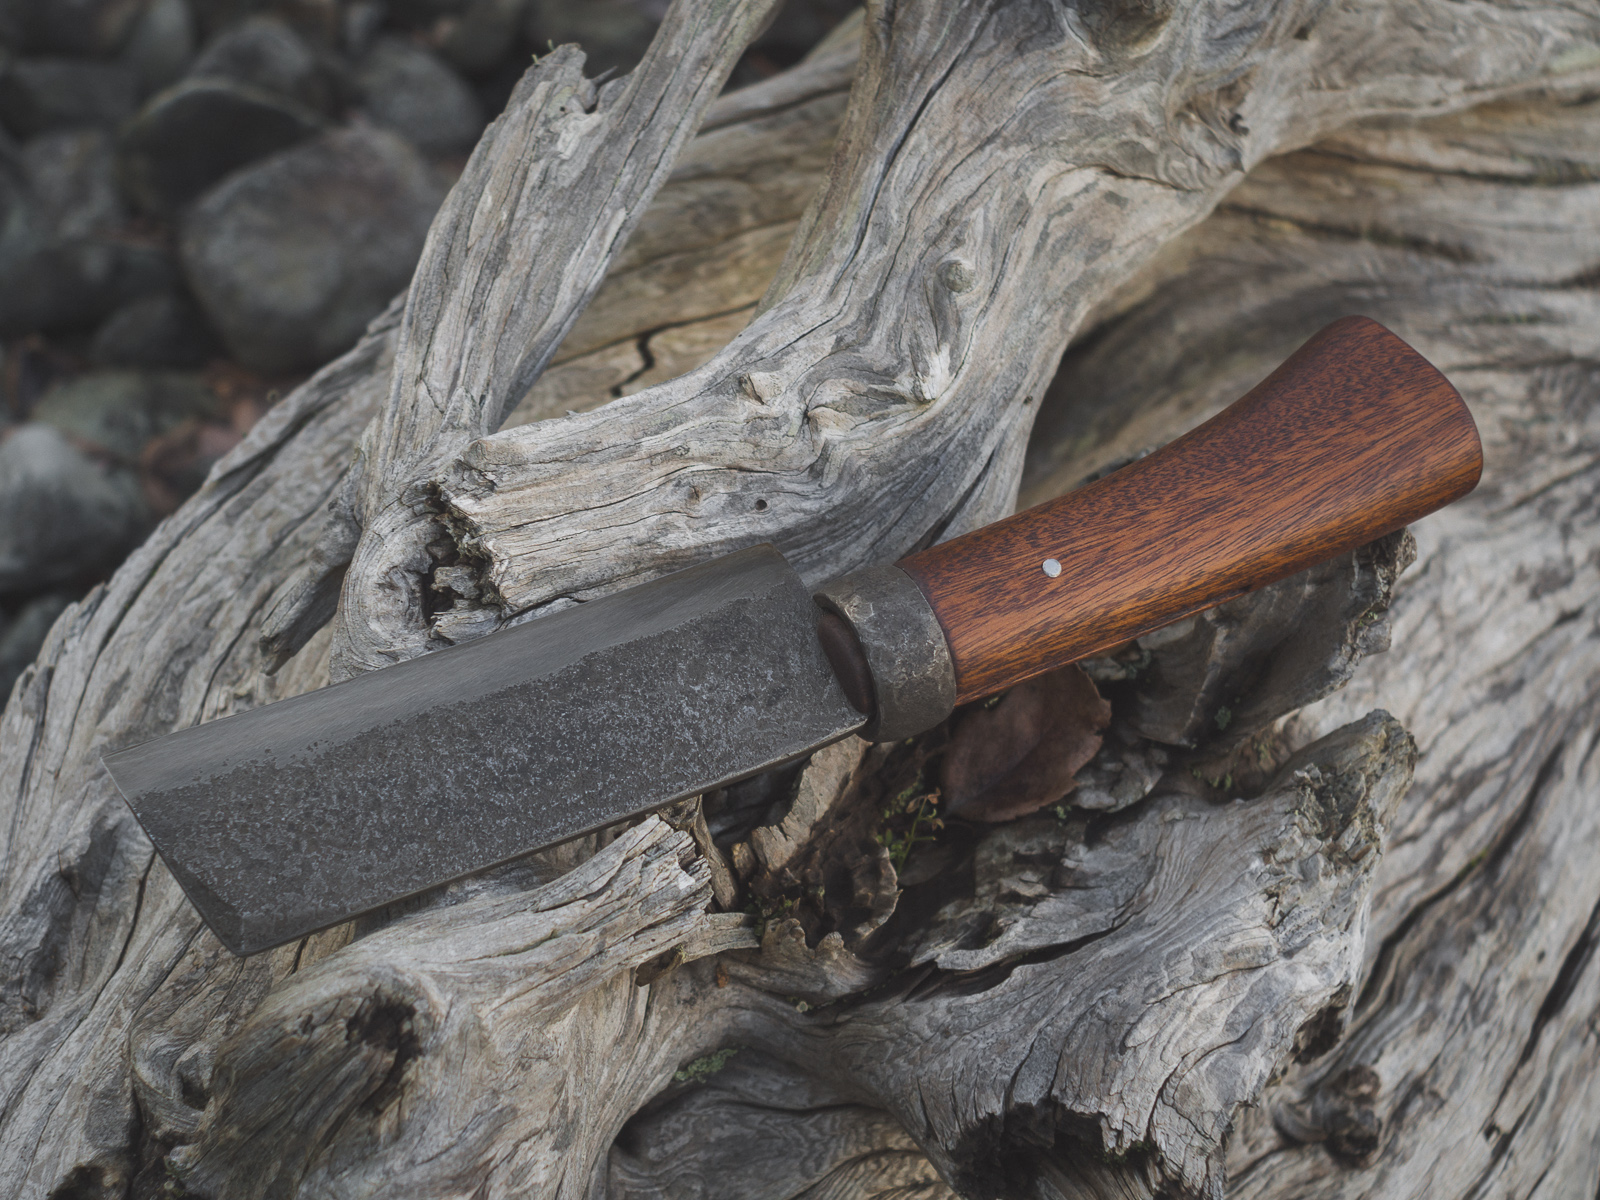 Island Blacksmith: Hand forged knives made from reclaimed and natural materials.